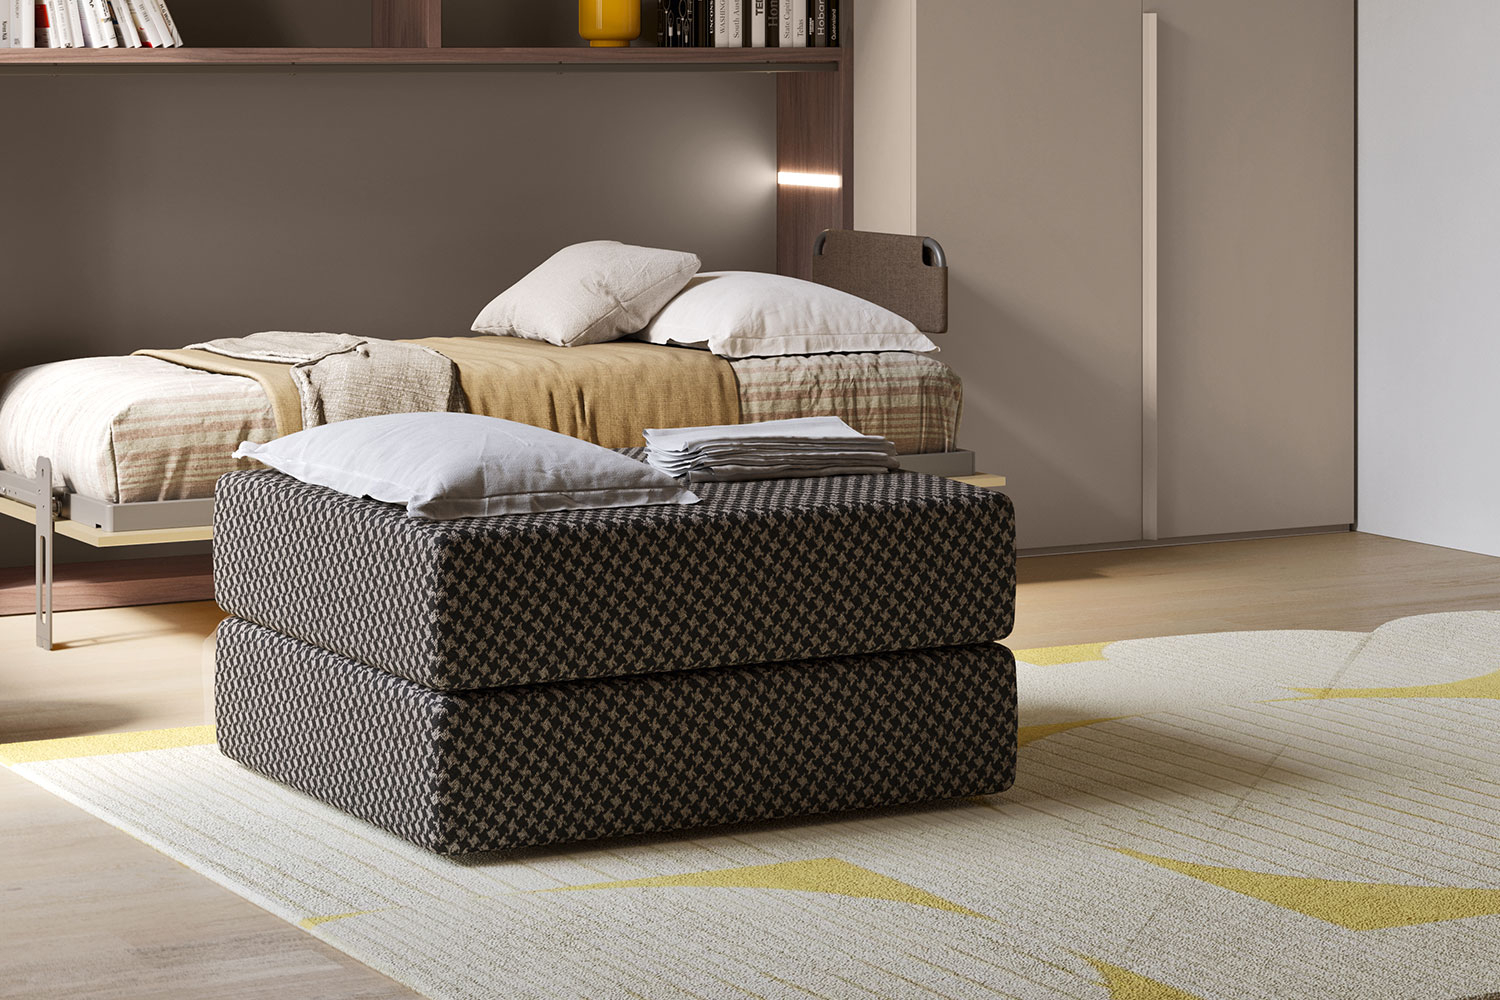 Foldable single bed pouffe for guests InMotion